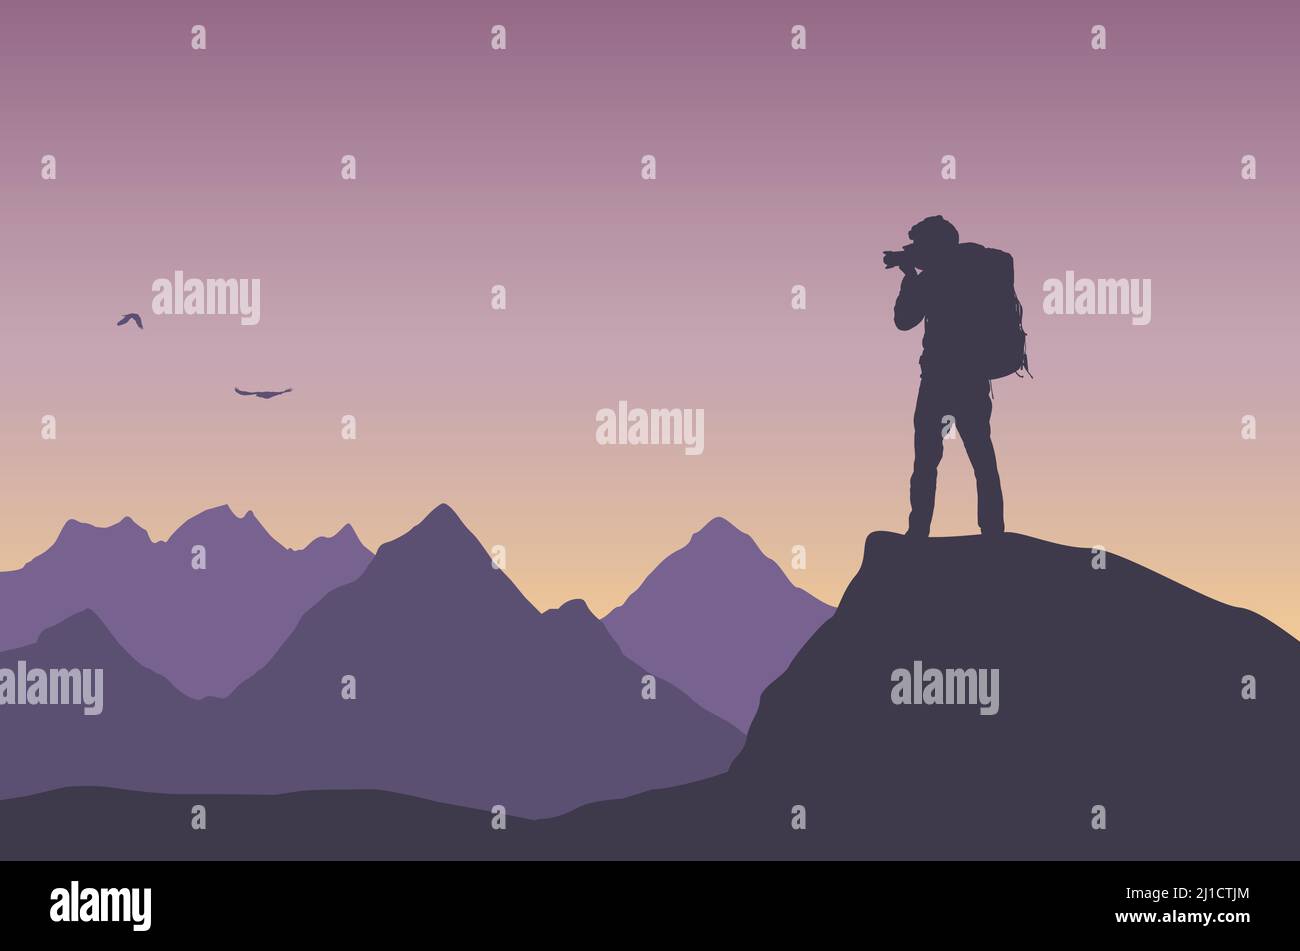 Flat design illustration of photographer tourist with camera. He stands on a rock and photographs the mountains and flying birds in the evening sky - Stock Vector